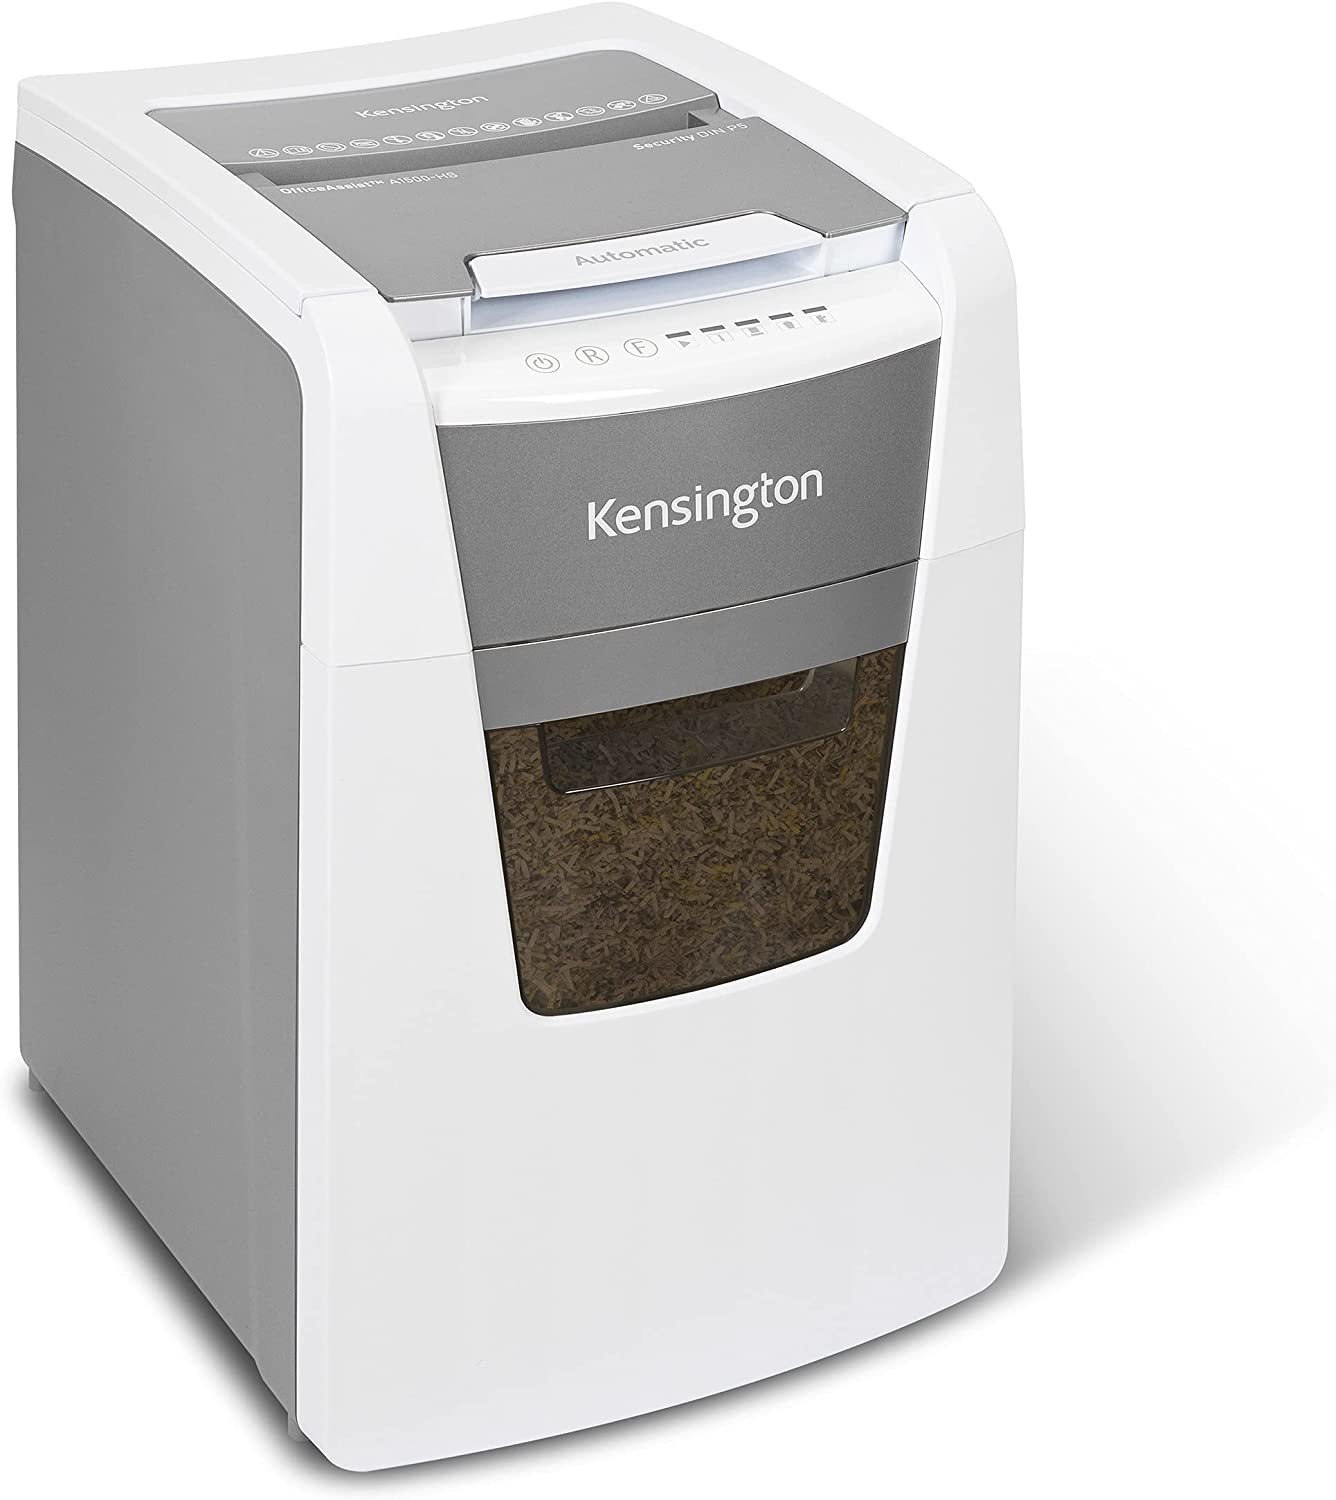 The Kensington Officeassist Auto Feed and 50 similar items